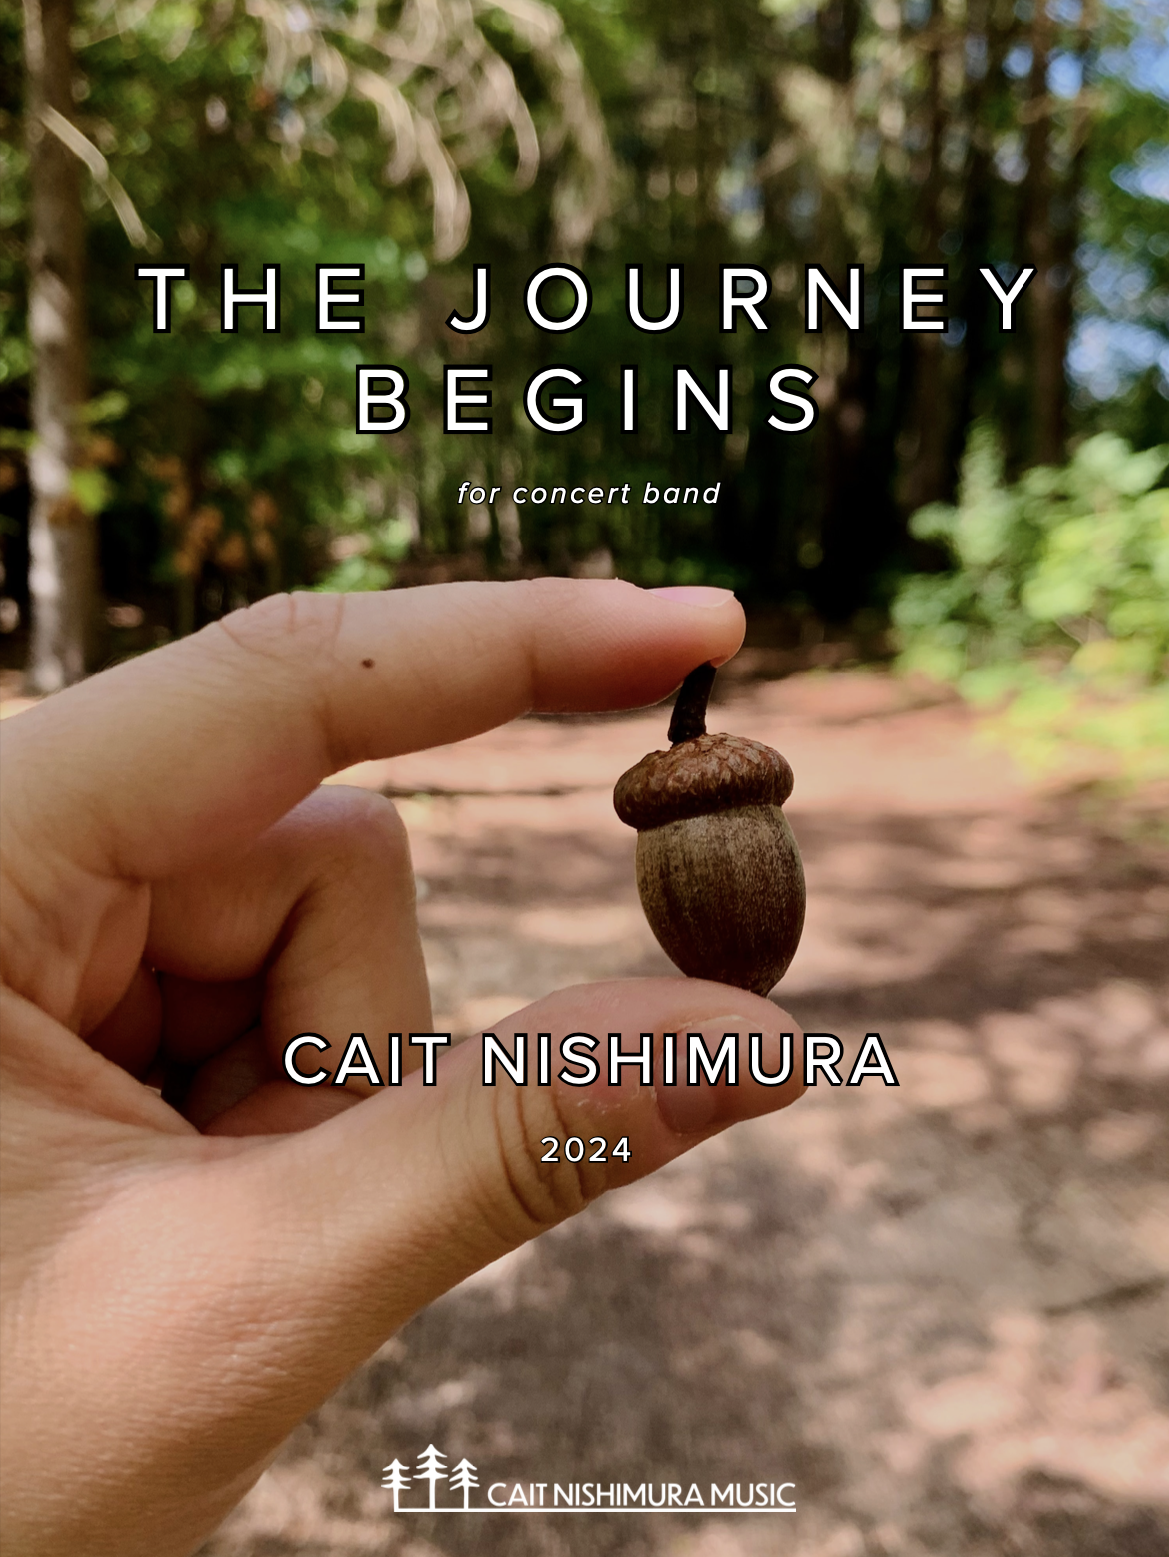 The Journey Begins (Score Only) by Cait Nishimura